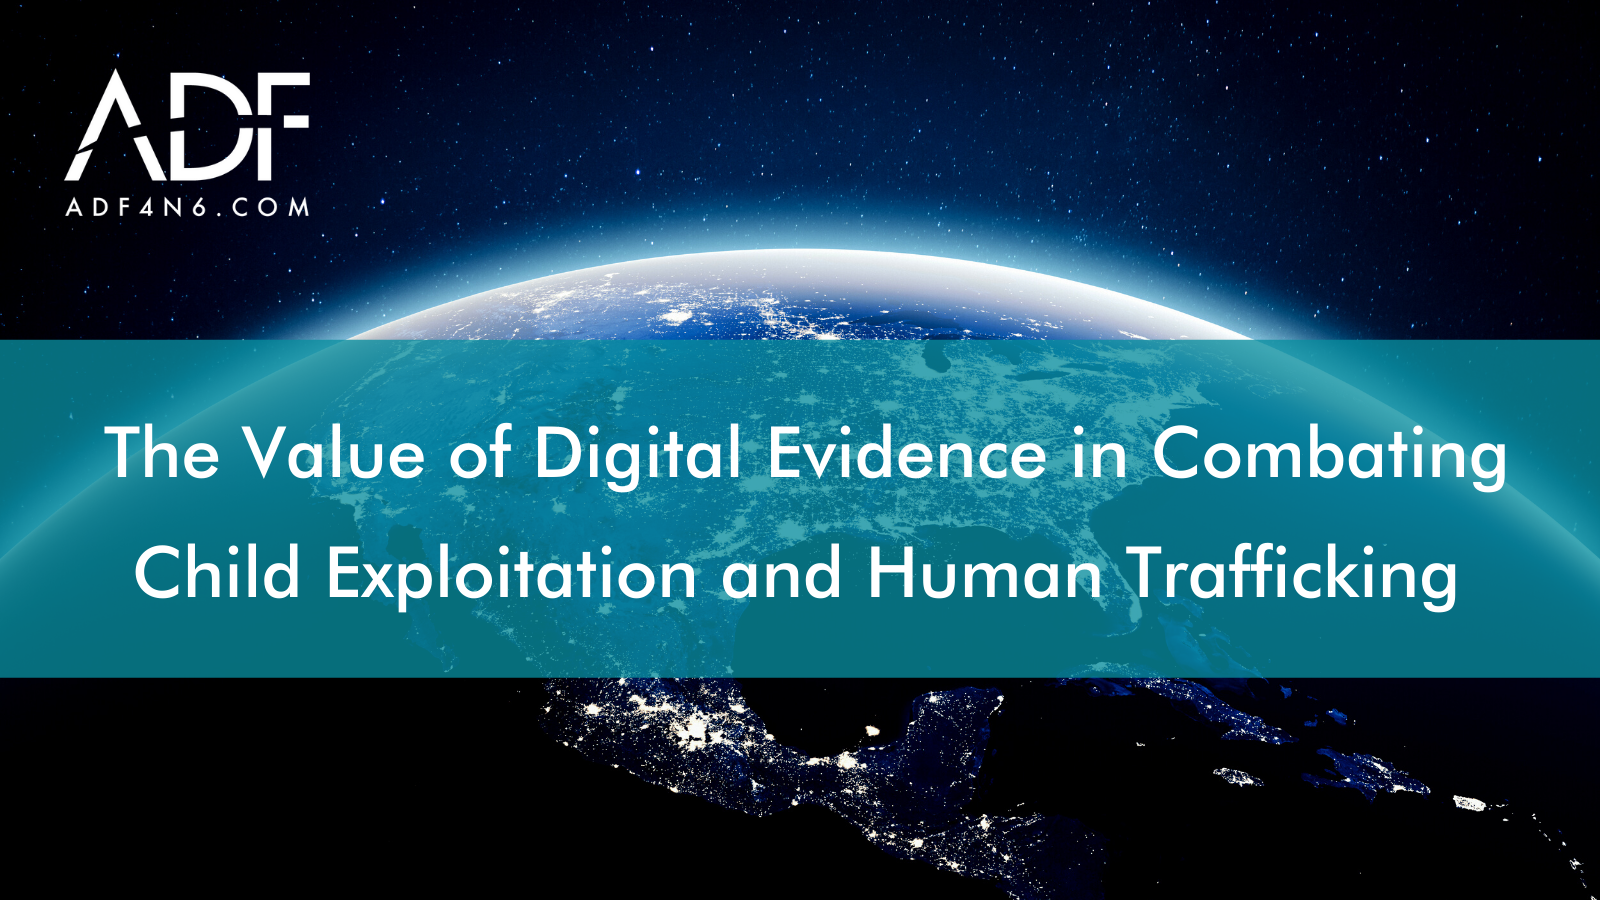 The Value of Digital Evidence in Combatting Child Exploitation and Human Trafficking